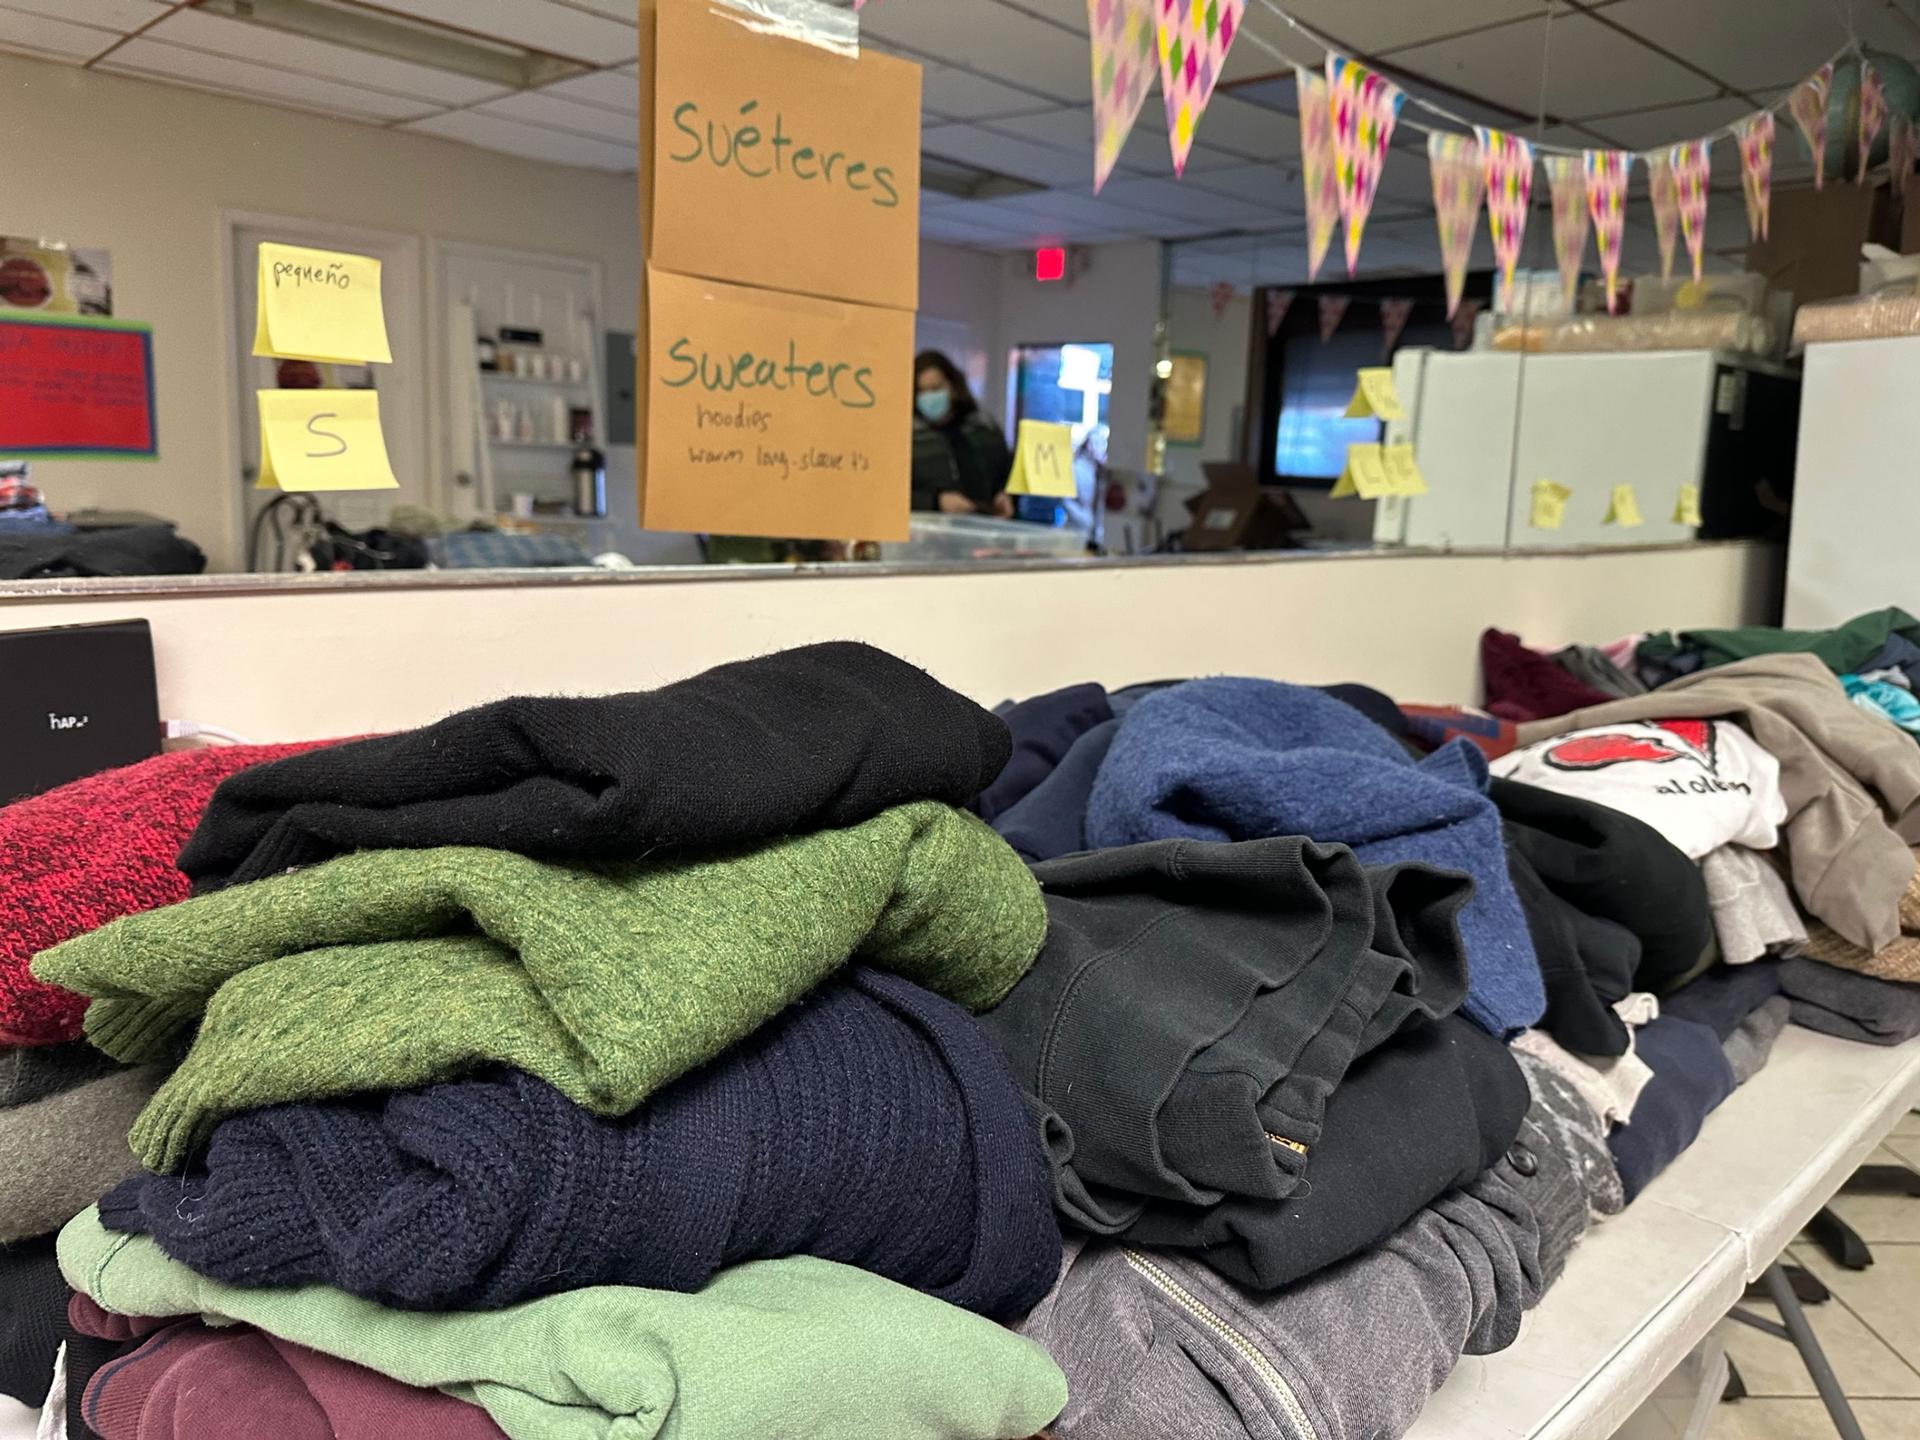 The volunteer organization Red Hook Mutual Aid is providing clothes to the migrants who have been moved to the neighborhood, many of whom don’t have winter clothes.